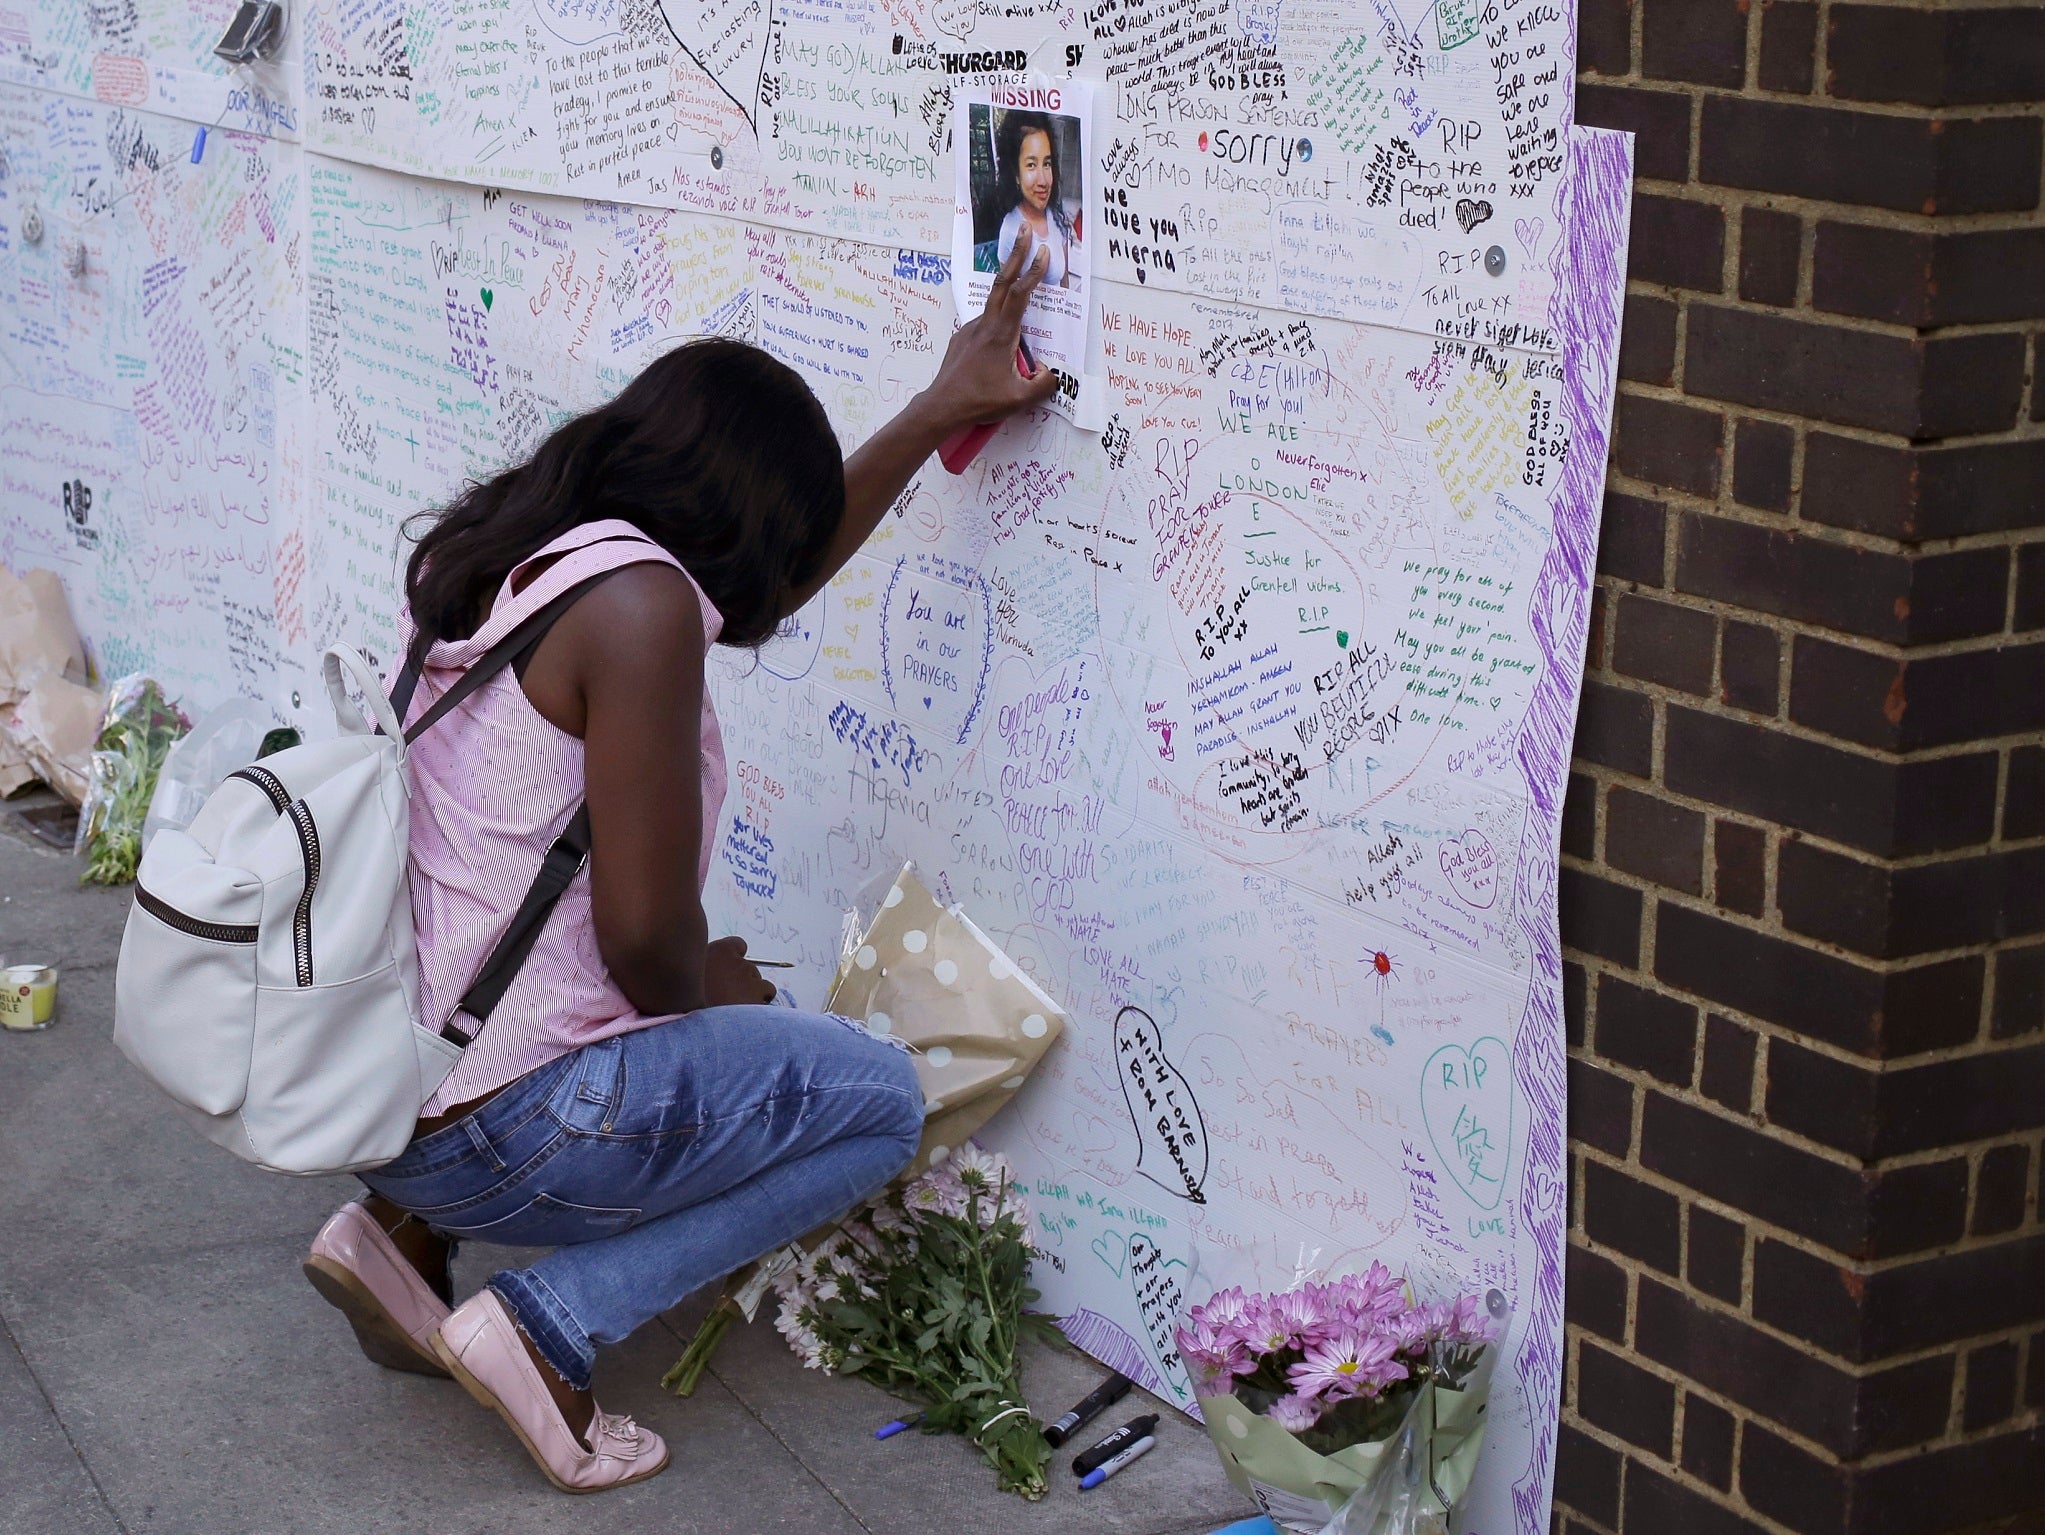 A woman touches a missing poster for 12-year-old Jessica Urbano next to the fire-gutted Grenfell Tower